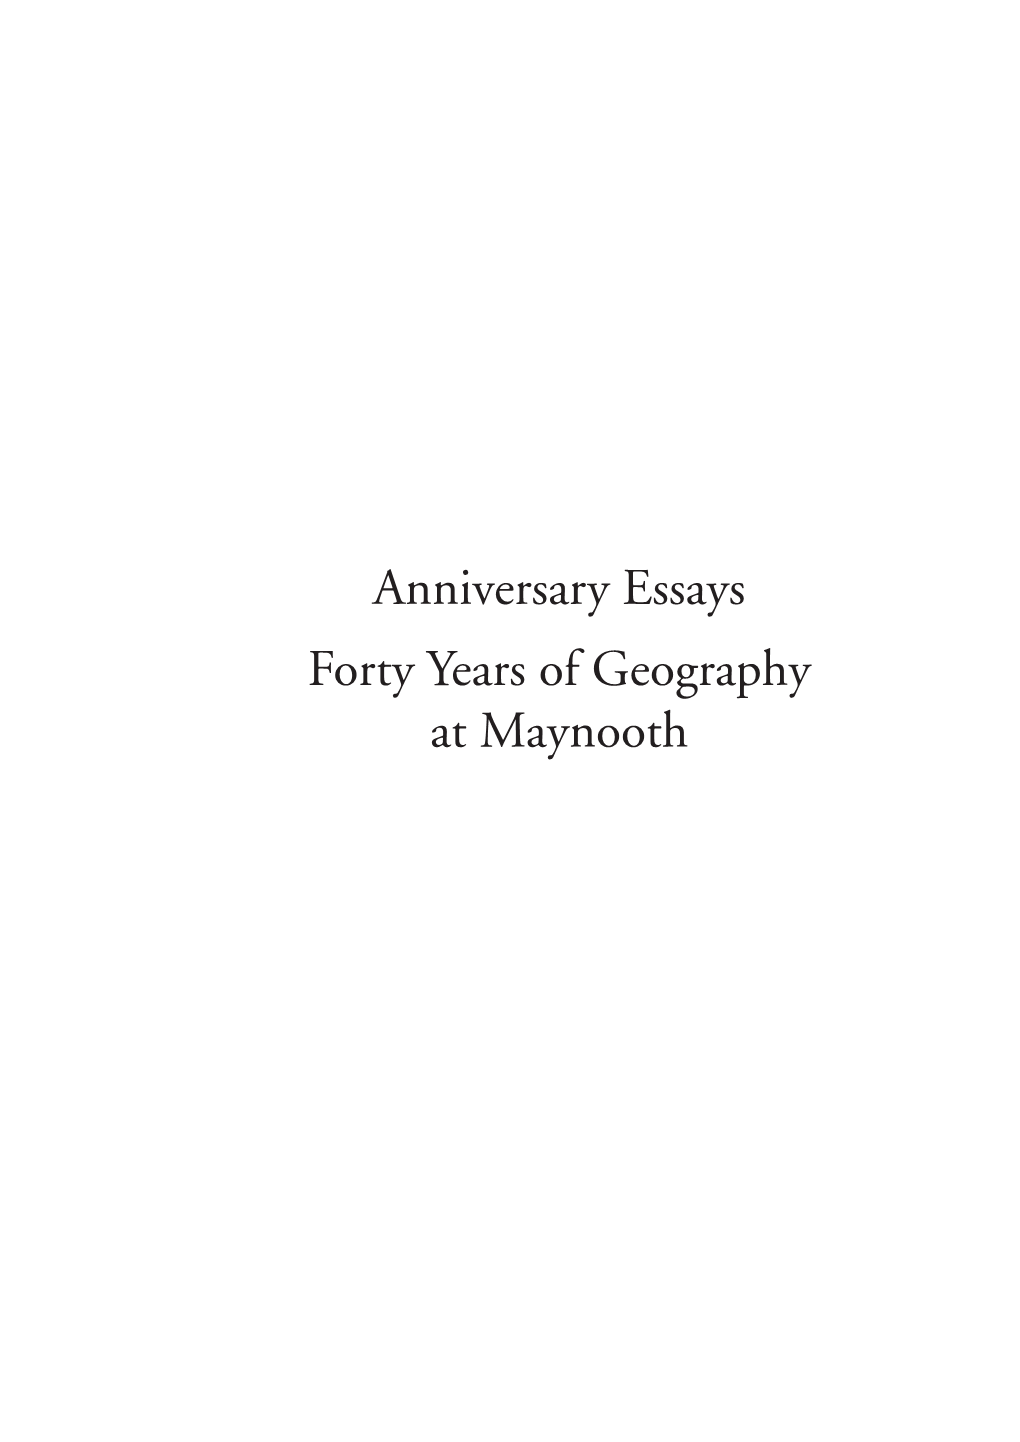 Anniversary Essays Forty Years of Geography at Maynooth